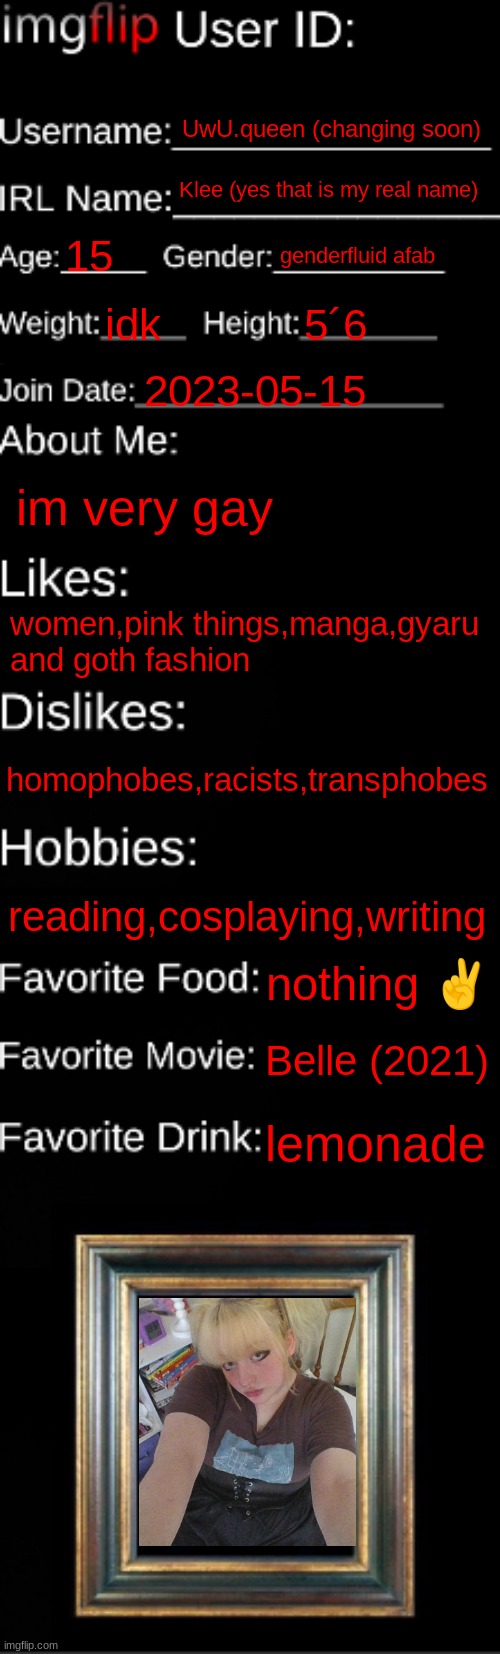 imgflip id <3 | UwU.queen (changing soon); Klee (yes that is my real name); 15; genderfluid afab; idk; 5´6; 2023-05-15; im very gay; women,pink things,manga,gyaru and goth fashion; homophobes,racists,transphobes; reading,cosplaying,writing; nothing ✌; Belle (2021); lemonade | image tagged in imgflip id card | made w/ Imgflip meme maker